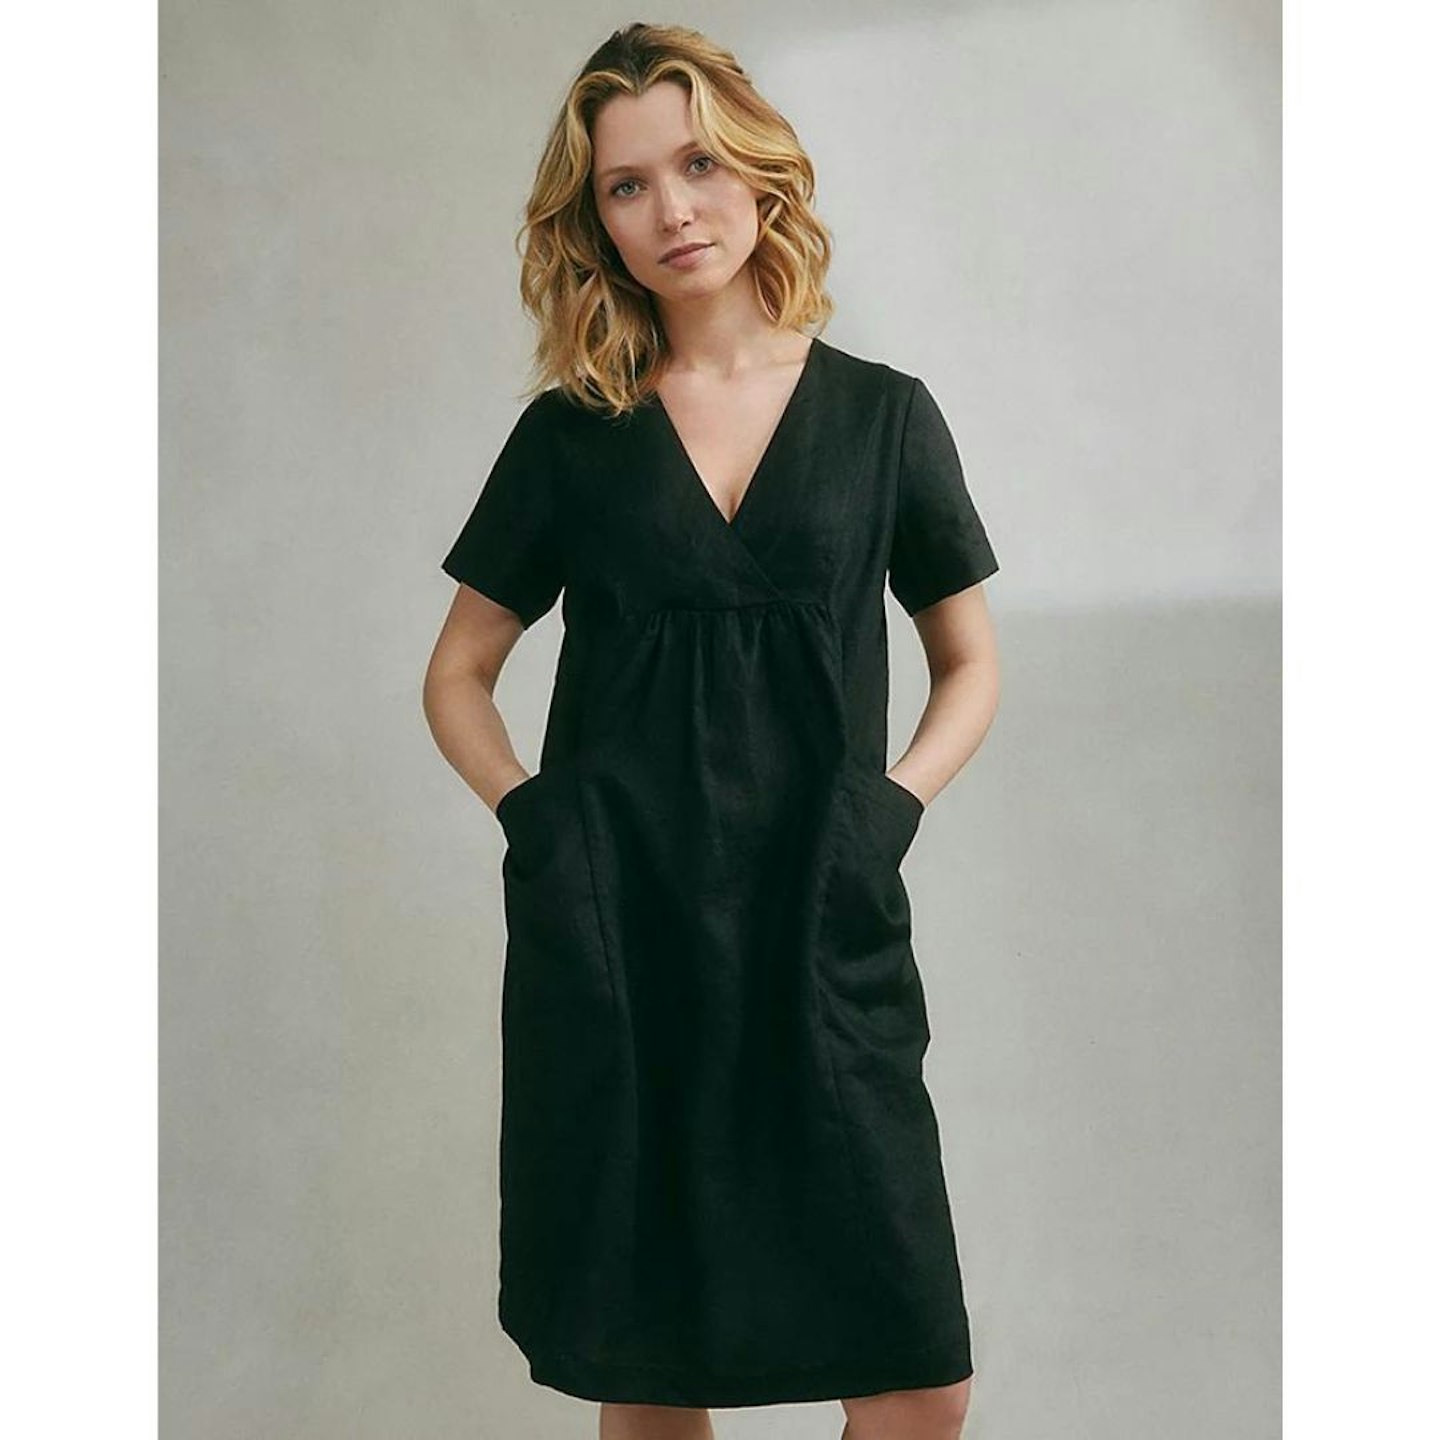 The White Company sale : Linen Cross Front Pop Over Dress